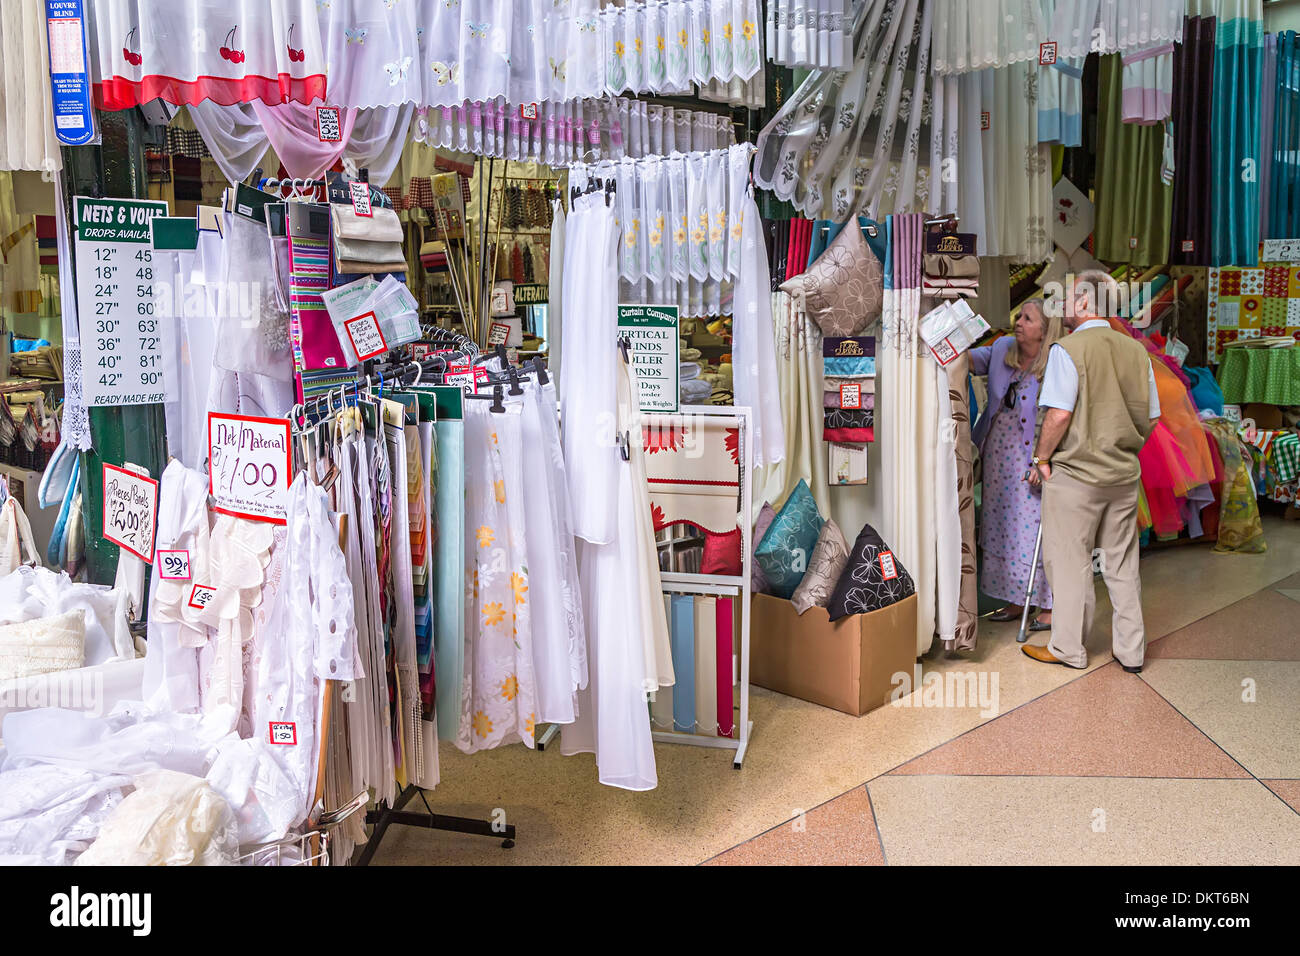 Shopping for materials in covered market, Newport, Gwent, Wales, UK Stock Photo